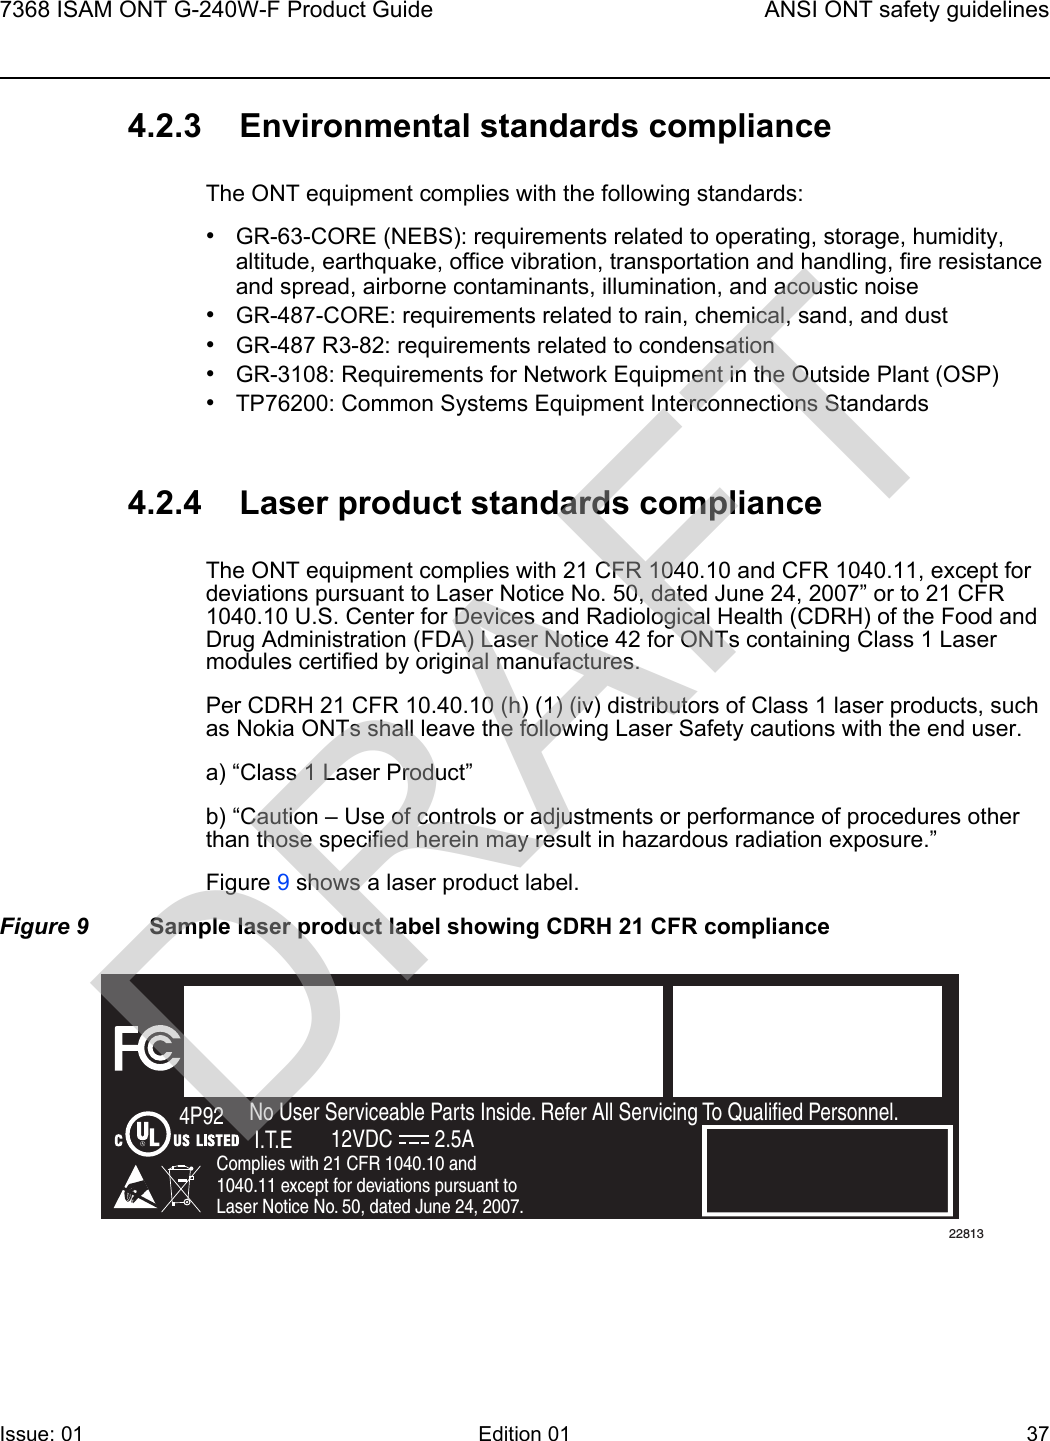 7368 ISAM ONT G-240W-F Product Guide ANSI ONT safety guidelinesIssue: 01 Edition 01 37 4.2.3 Environmental standards complianceThe ONT equipment complies with the following standards:•GR-63-CORE (NEBS): requirements related to operating, storage, humidity, altitude, earthquake, office vibration, transportation and handling, fire resistance and spread, airborne contaminants, illumination, and acoustic noise•GR-487-CORE: requirements related to rain, chemical, sand, and dust•GR-487 R3-82: requirements related to condensation •GR-3108: Requirements for Network Equipment in the Outside Plant (OSP)•TP76200: Common Systems Equipment Interconnections Standards4.2.4 Laser product standards complianceThe ONT equipment complies with 21 CFR 1040.10 and CFR 1040.11, except for deviations pursuant to Laser Notice No. 50, dated June 24, 2007” or to 21 CFR 1040.10 U.S. Center for Devices and Radiological Health (CDRH) of the Food and Drug Administration (FDA) Laser Notice 42 for ONTs containing Class 1 Laser modules certified by original manufactures.Per CDRH 21 CFR 10.40.10 (h) (1) (iv) distributors of Class 1 laser products, such as Nokia ONTs shall leave the following Laser Safety cautions with the end user.a) “Class 1 Laser Product”b) “Caution – Use of controls or adjustments or performance of procedures other than those specified herein may result in hazardous radiation exposure.”Figure 9 shows a laser product label.Figure 9 Sample laser product label showing CDRH 21 CFR complianceFiOS EnabledTo Order FiOS: 888 GET-FiOSor visit Verizon.comFor Service: 888 553-15552301 Sugar Bush Rd.Raleigh, NC 27612No User Serviceable Parts Inside. Refer All Servicing To Qualified Personnel.Complies with 21 CFR 1040.10 and 1040.11 except for deviations pursuant to Laser Notice No. 50, dated June 24, 2007.4P92I.T.E 12VDC 2.5A22813DRAFT